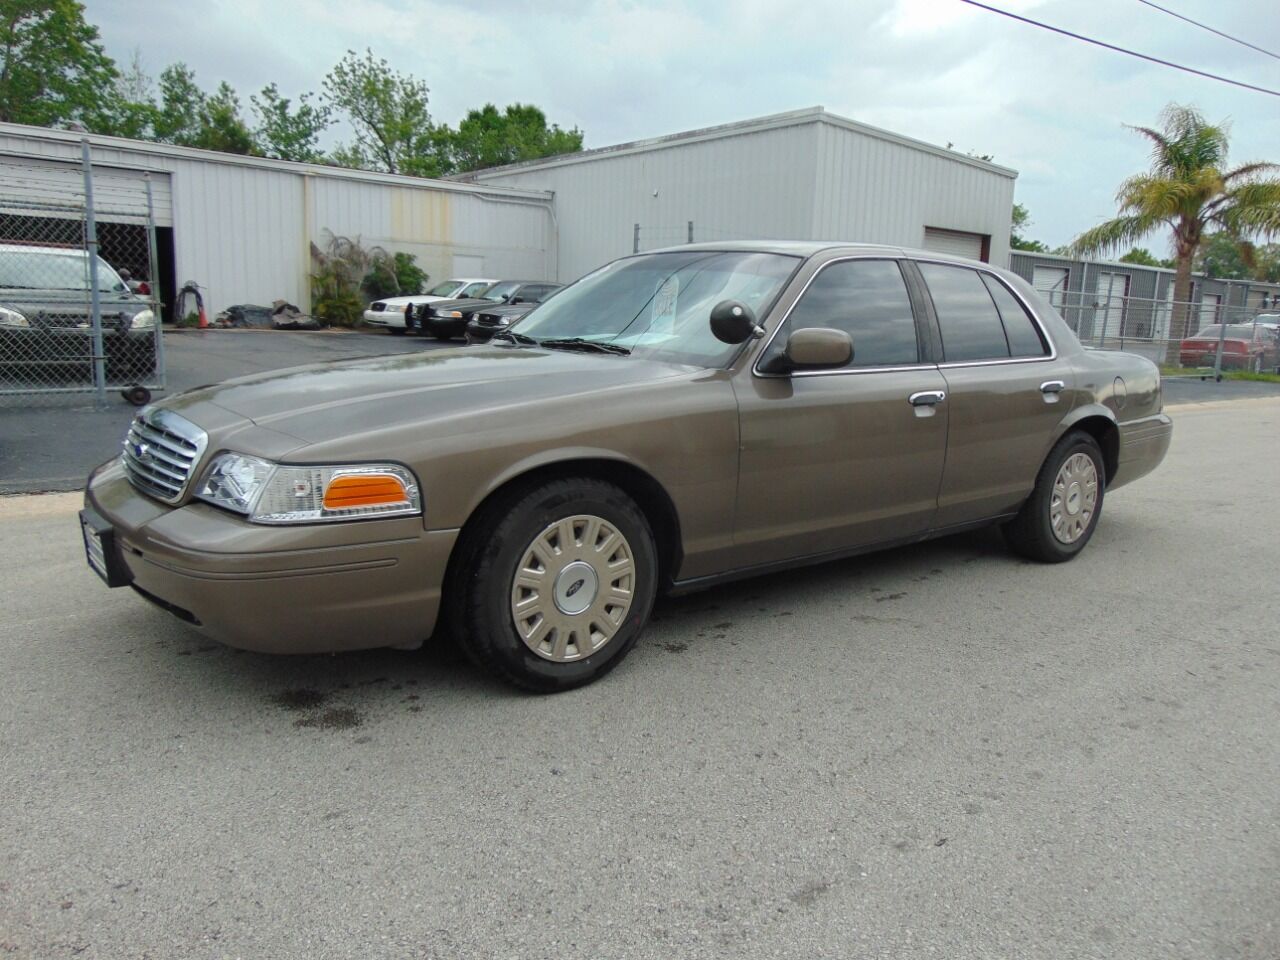 2003 Ford Crown Victoria For Sale - Carsforsale.com®